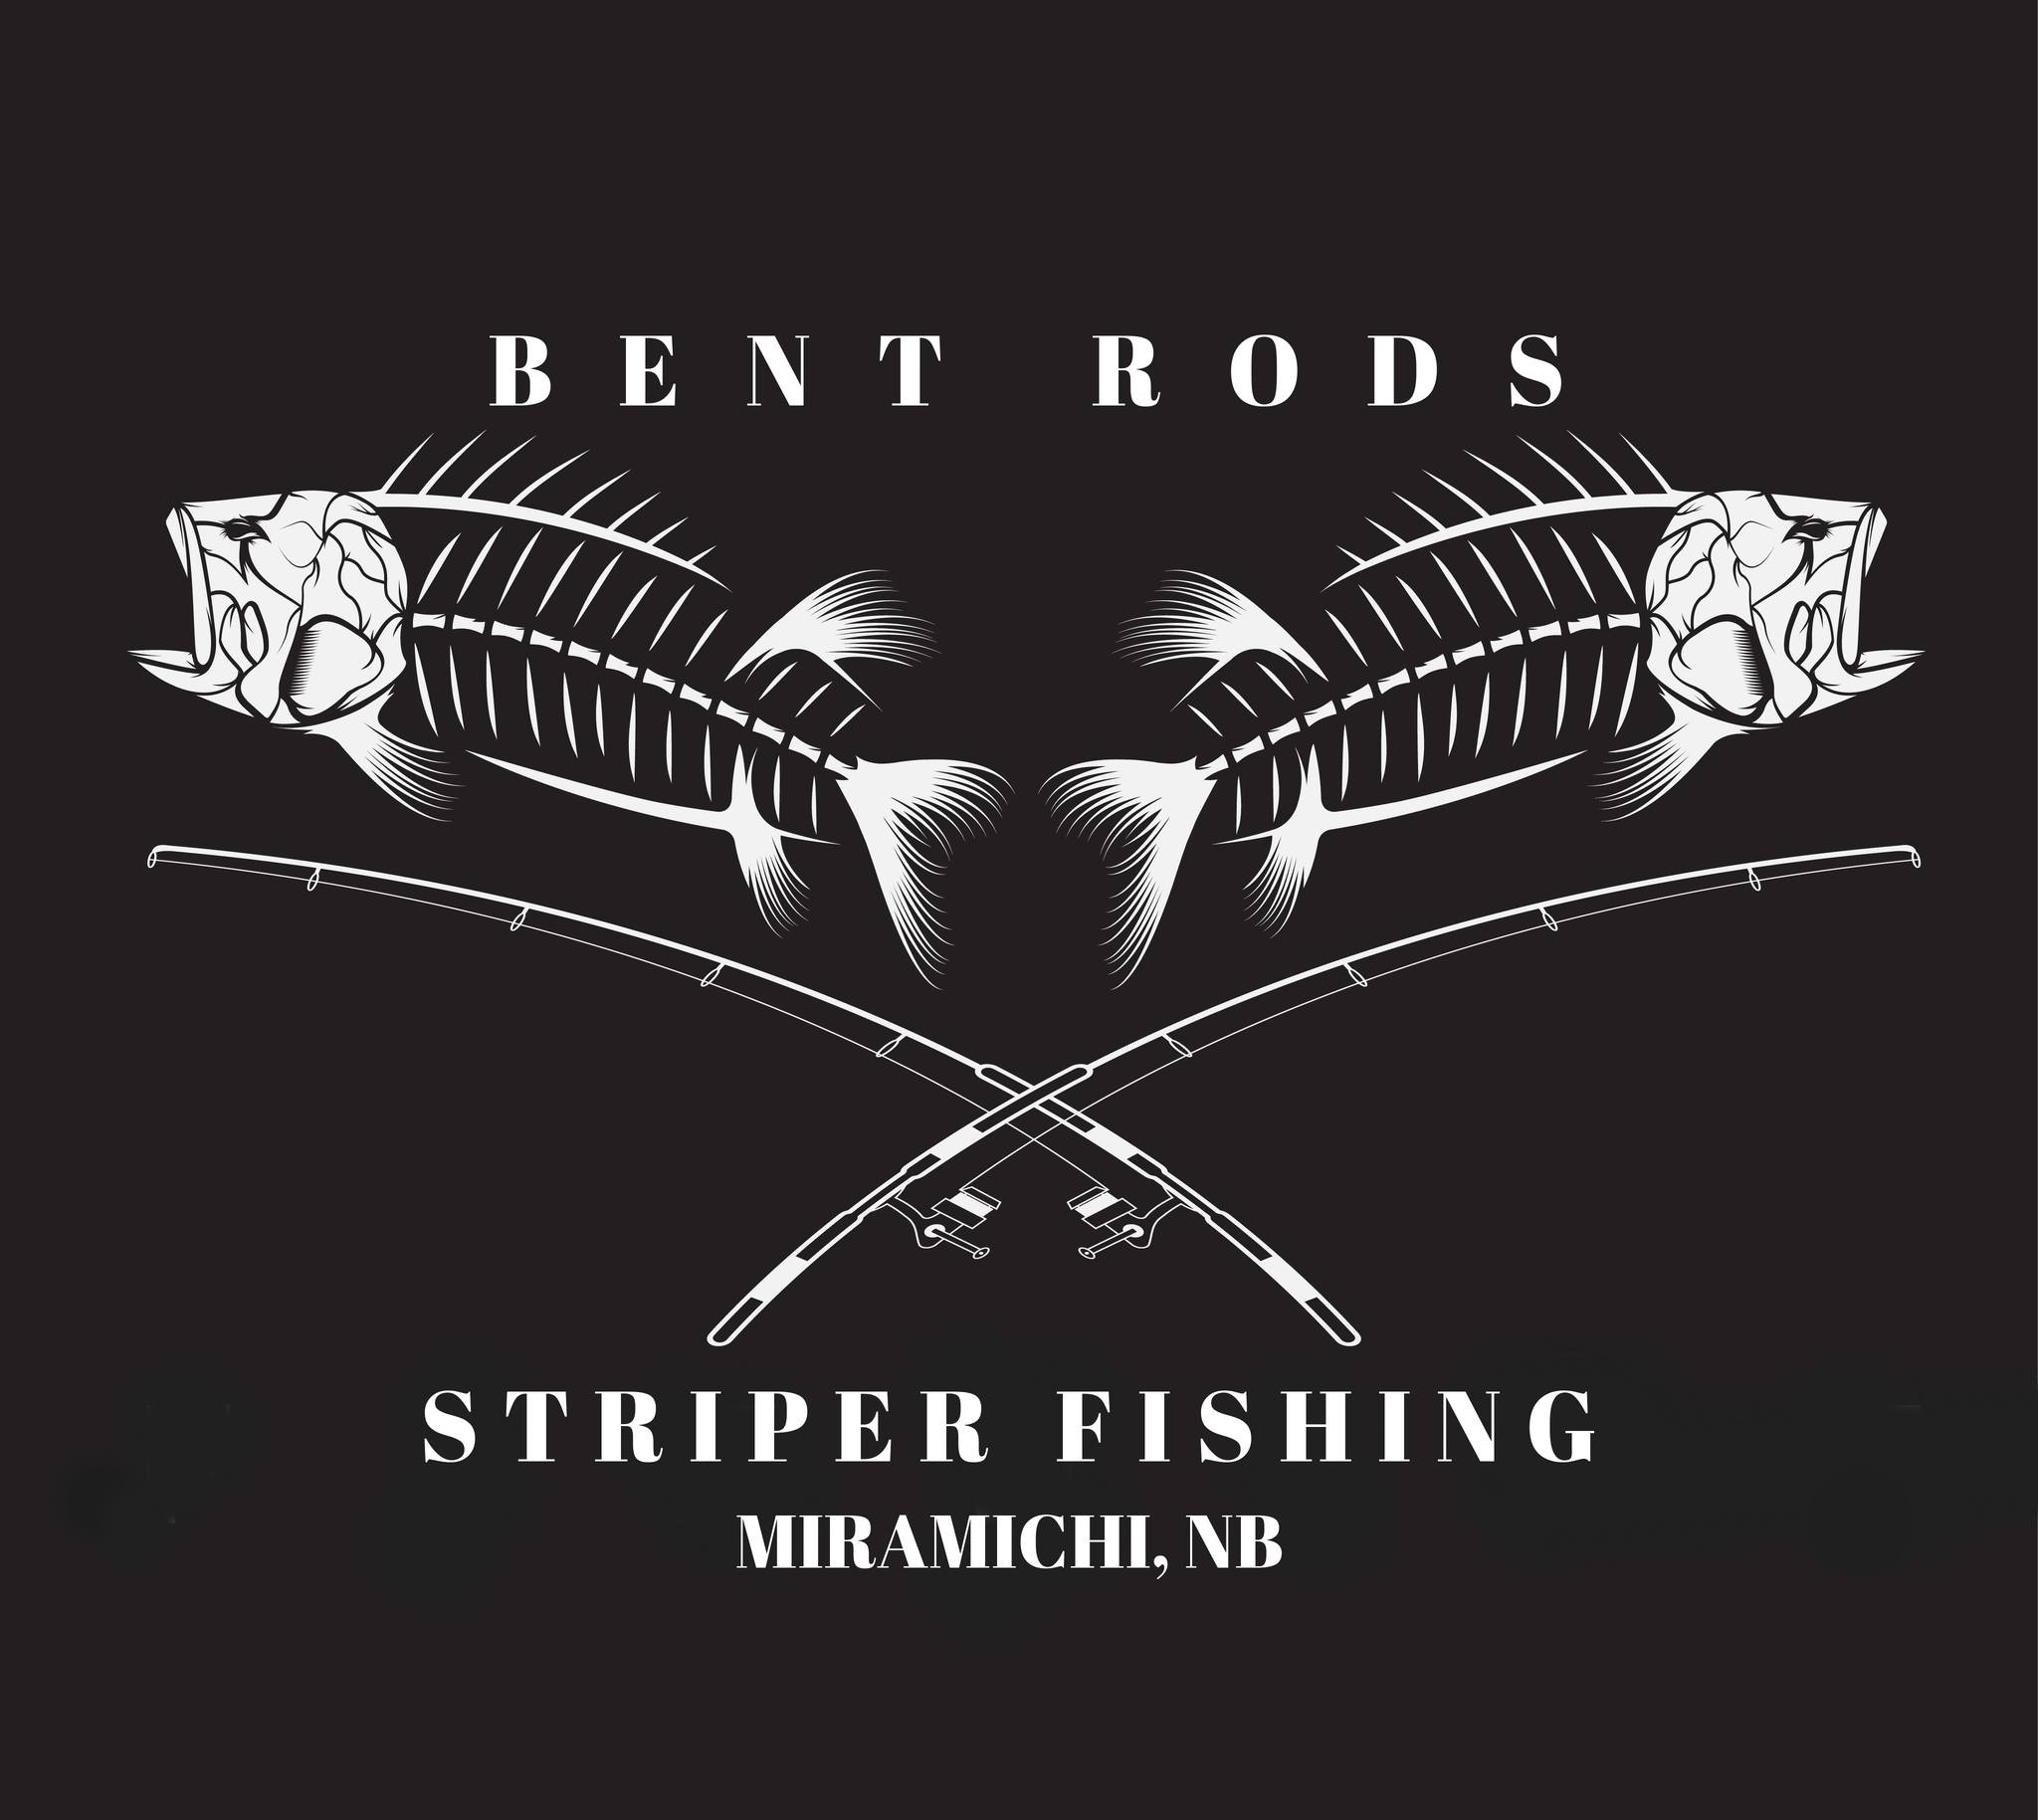 BENT RODS STRIPER FISHING - Doiron Sports Excellence